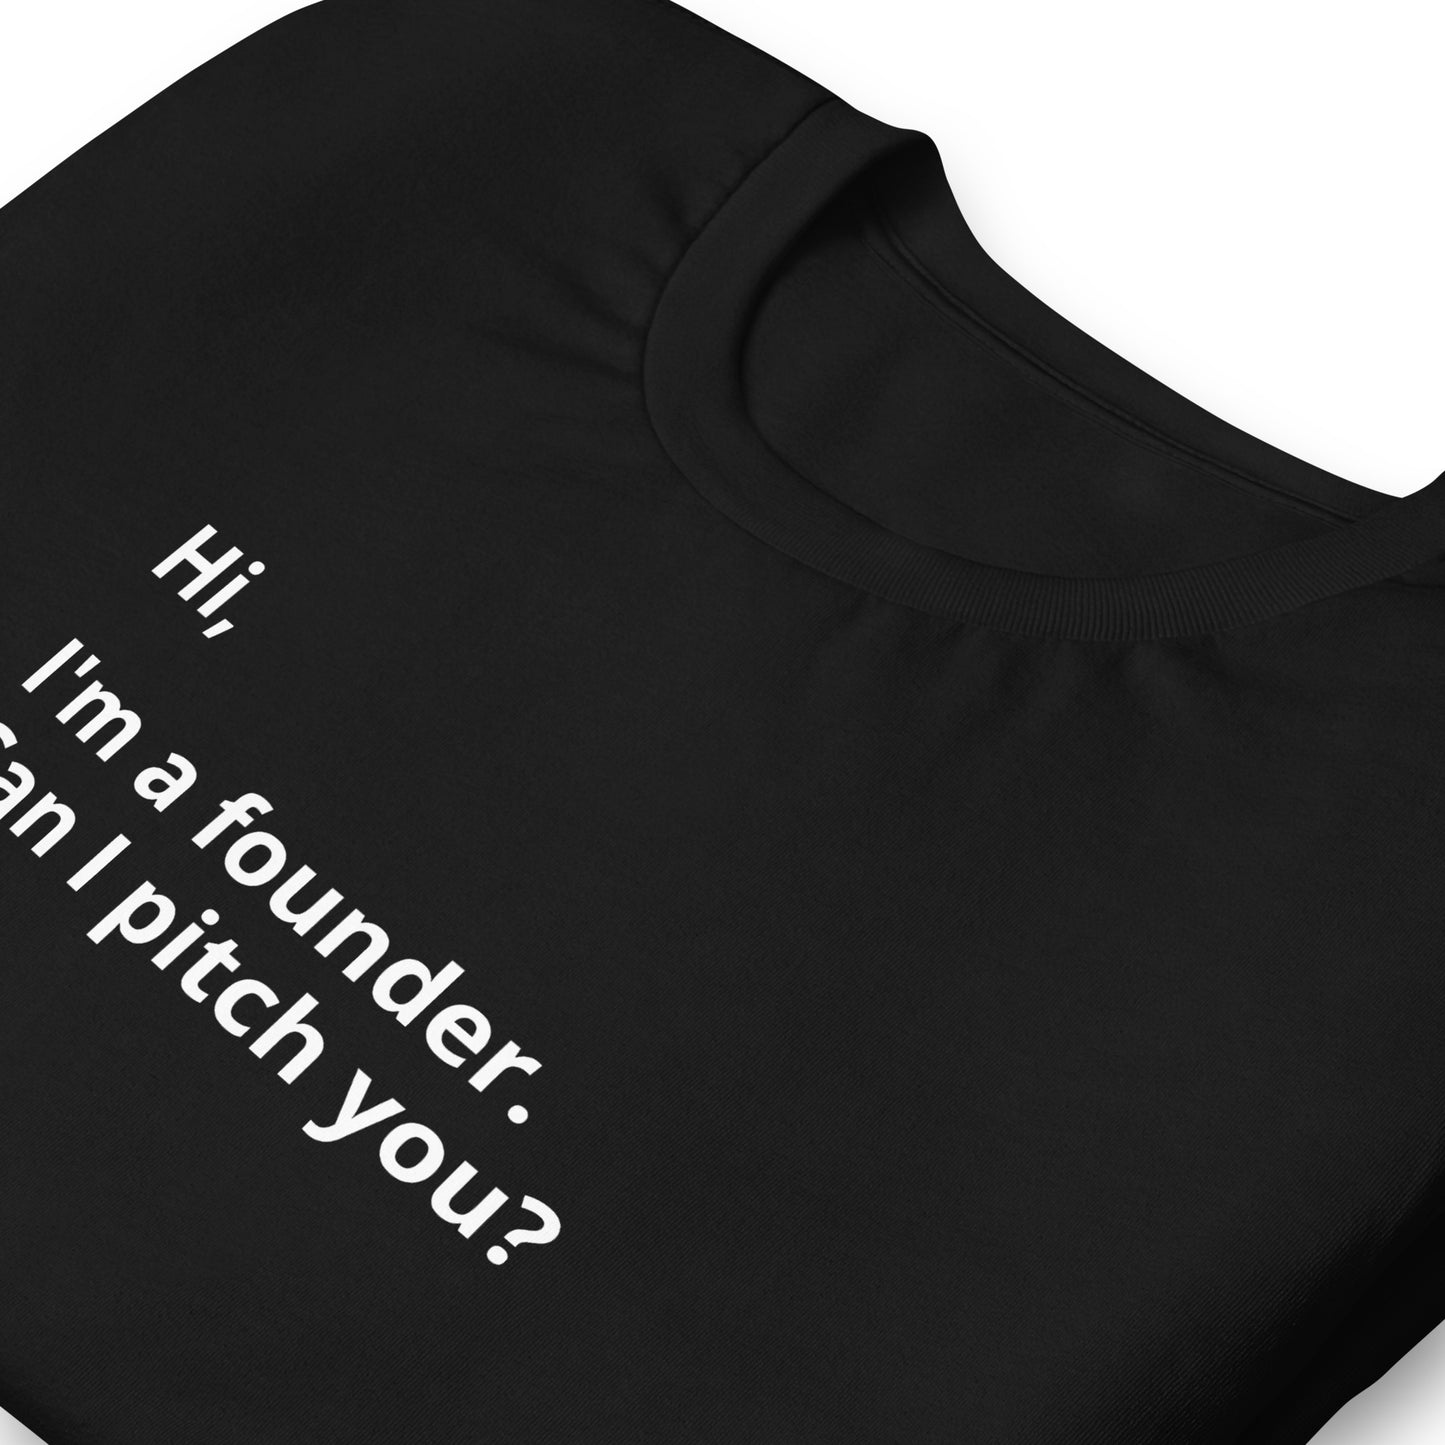 I'm A Founder. Can I Pitch You? Unisex T-Shirt (Text On Both Sides Of Shirt)